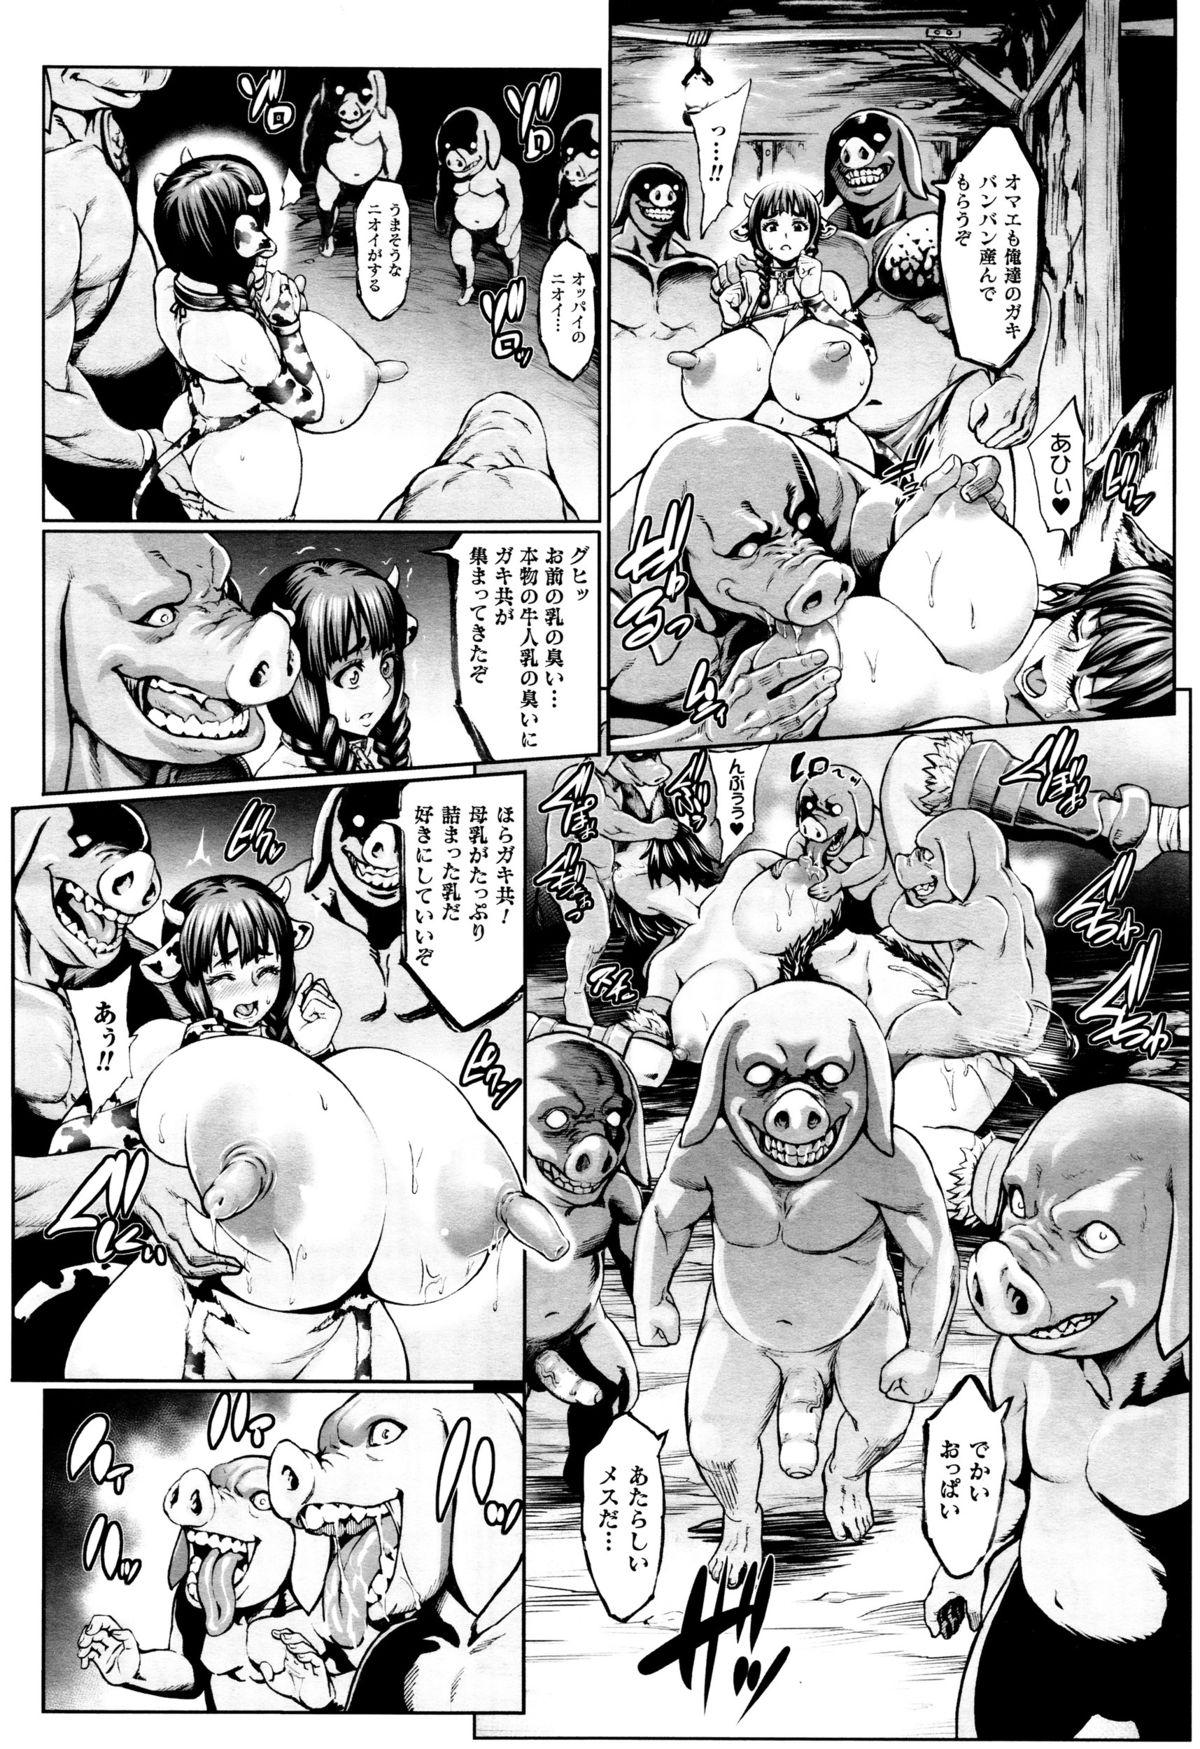 Fat 醜悪な豚亜人に囚われた牛娘を繁殖牧場で輪姦陵辱！ Blow - Page 6